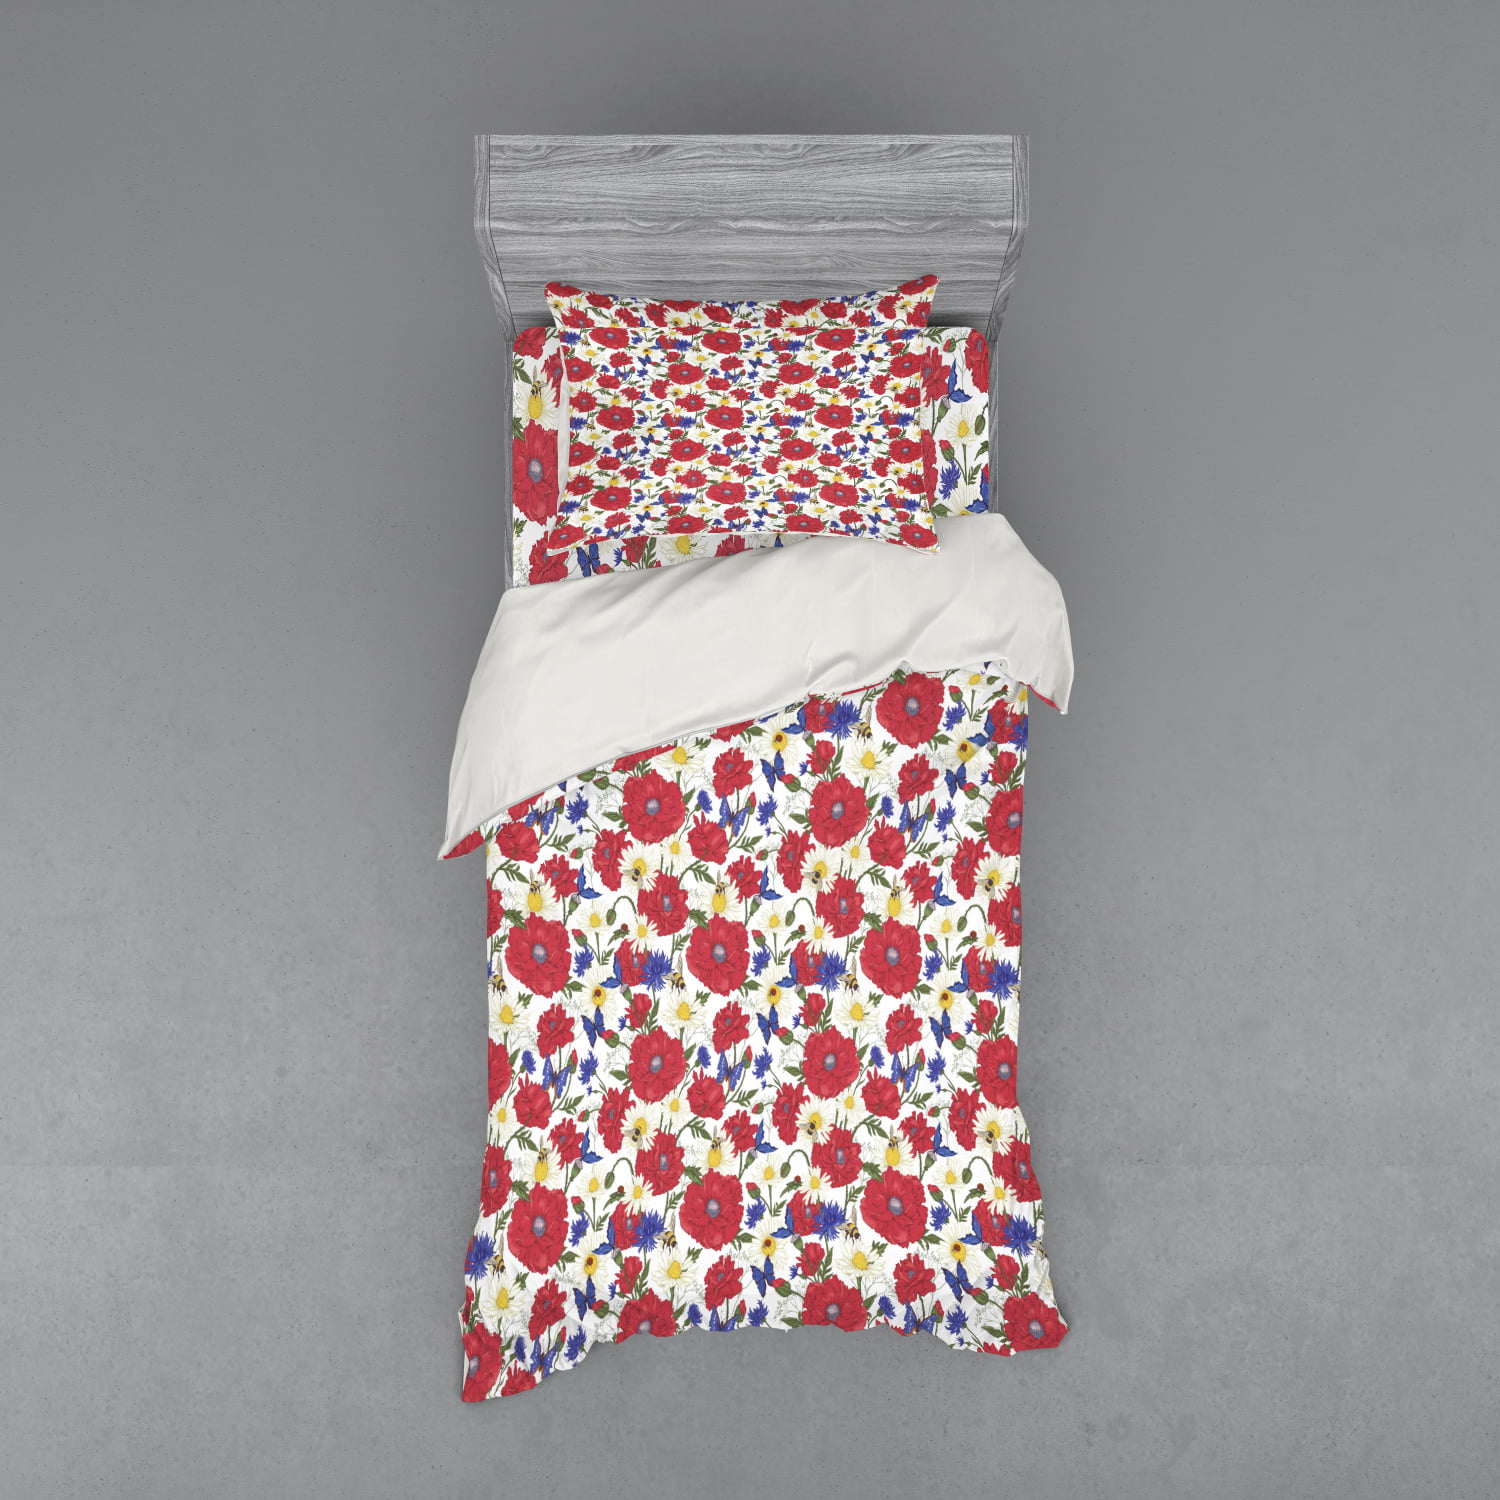 Floral Duvet Cover Set Blooming Red Poppies Chamomile Ladybird